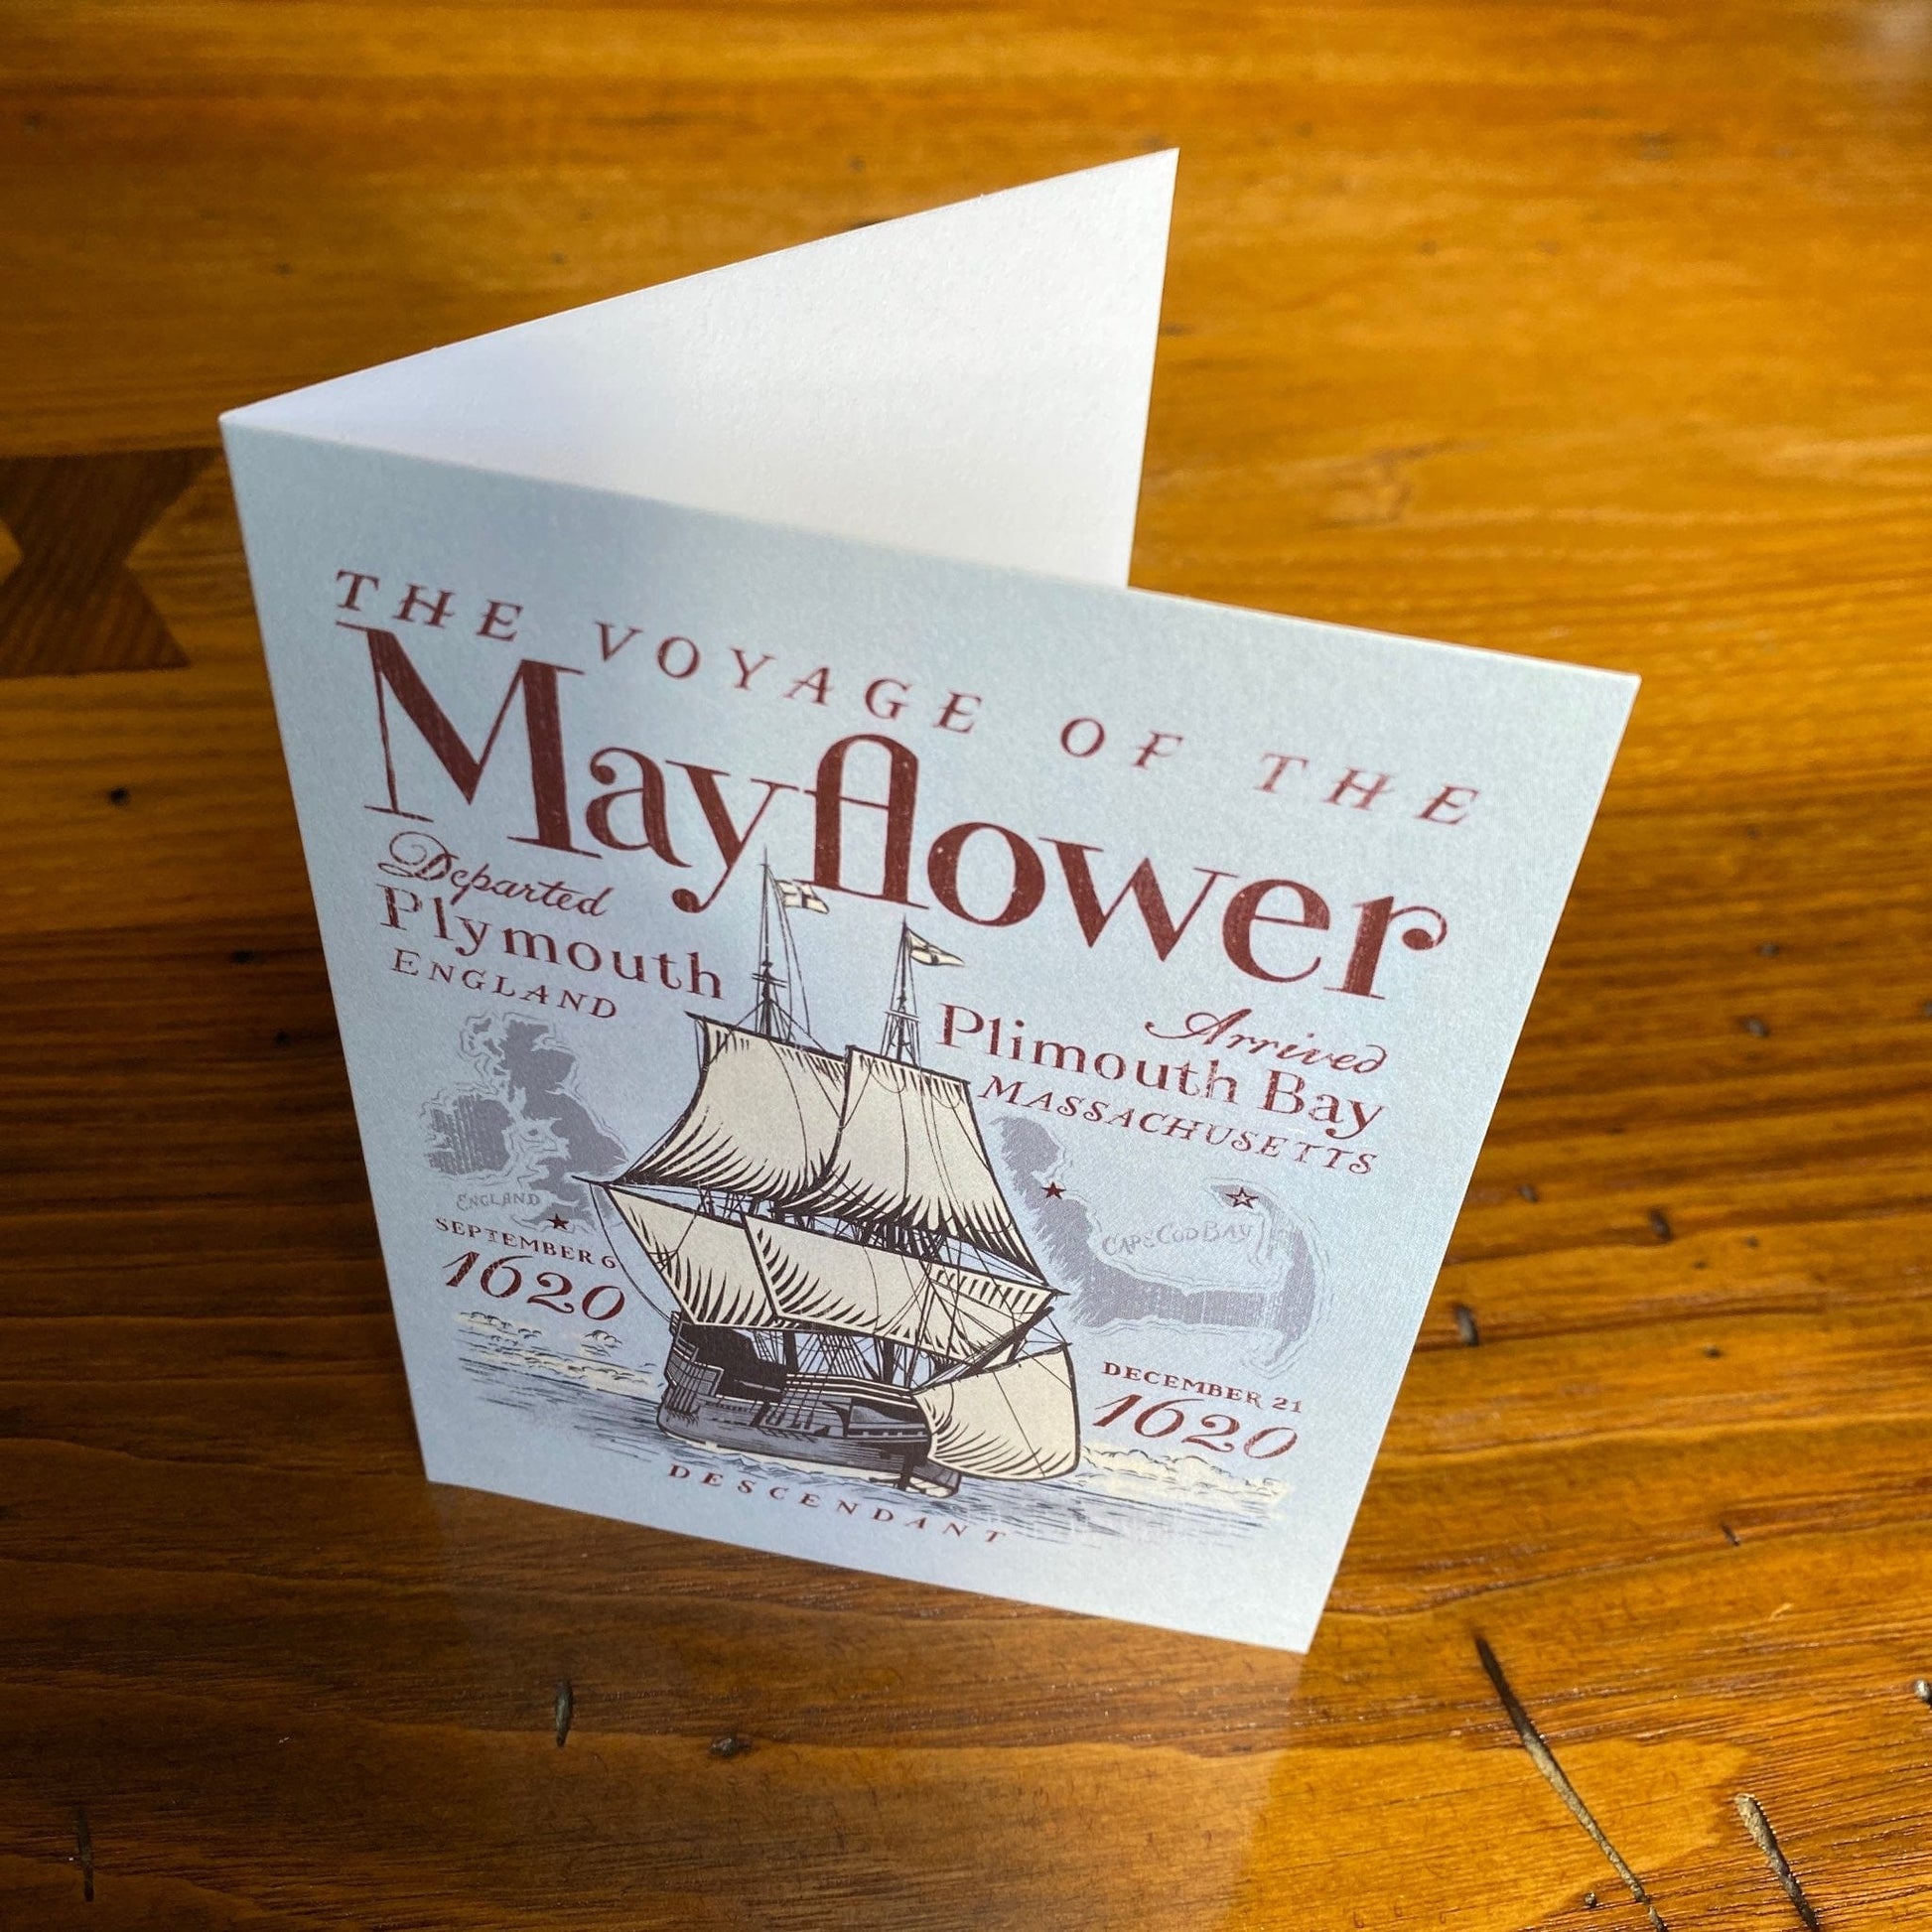 "The Voyage of the Mayflower" Note cards from the history list store